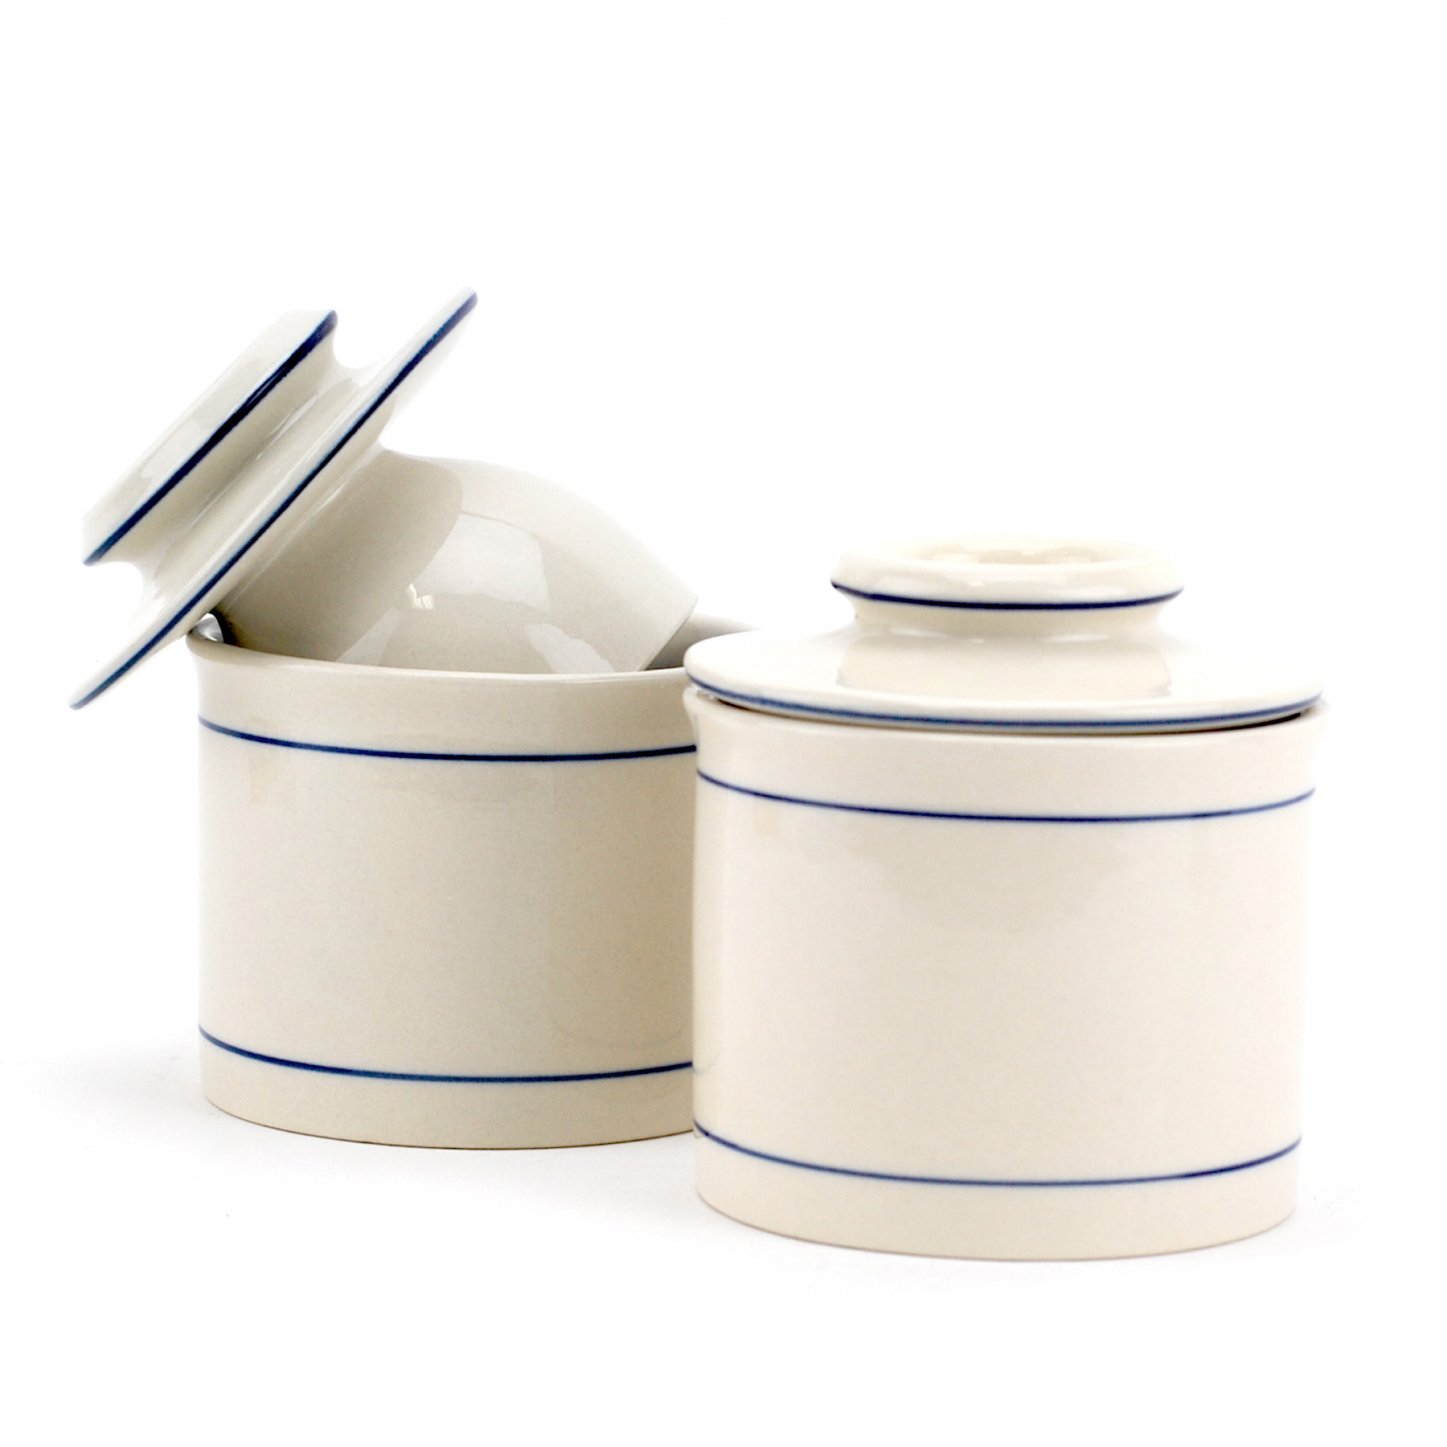 Norpro Glazed Stoneware Butter Keeper - Holds 1 Stick of Butter (2-Pack)